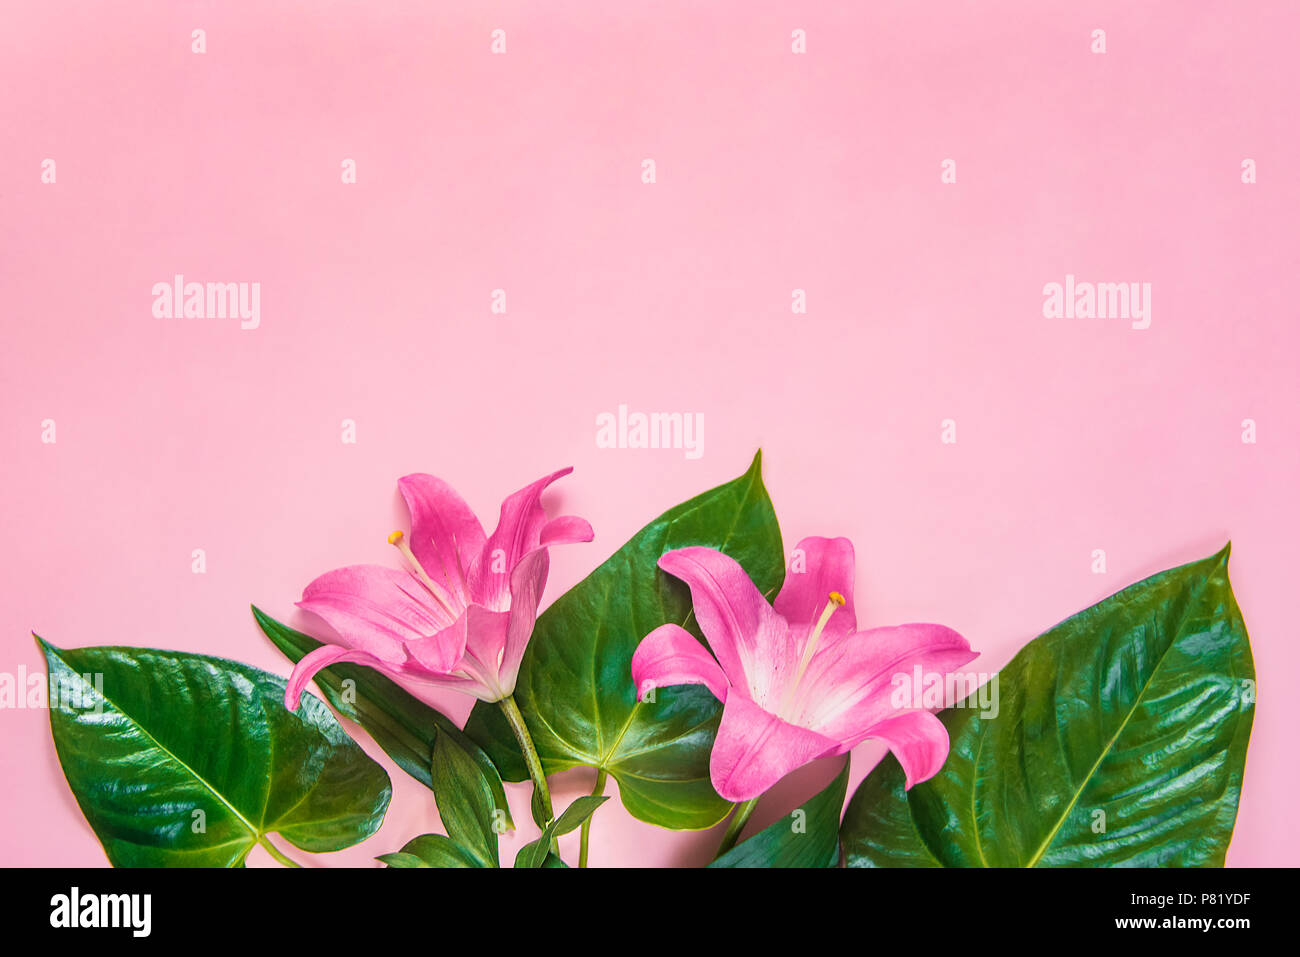 Flat lay of lilium flowers and green leaves over pink backgroung. Copy space. Stock Photo